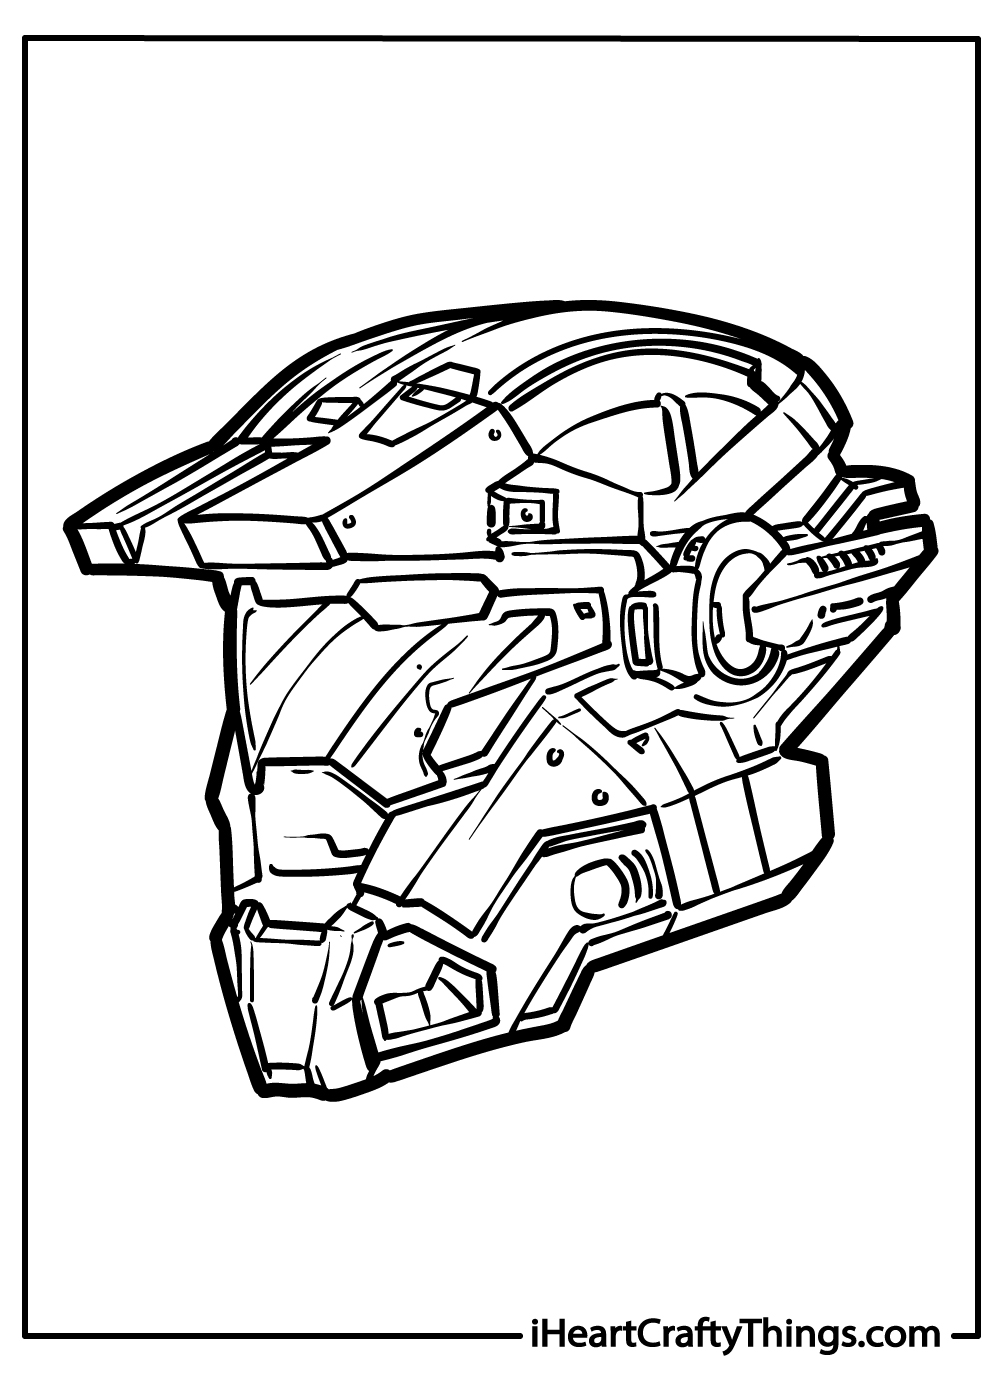 Halo coloring pages free printables